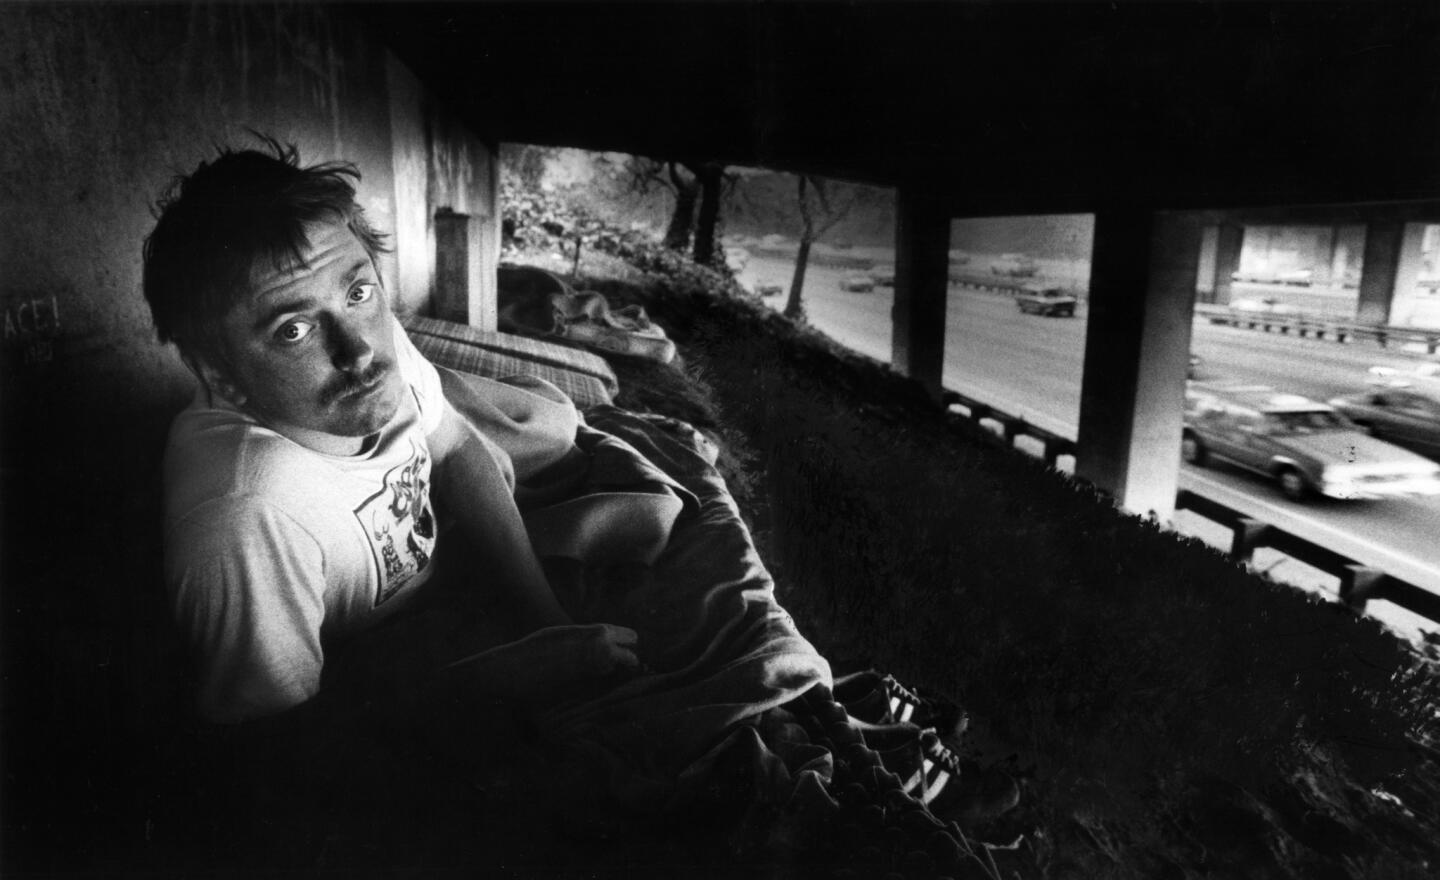 Nov. 8, 1982: Tom Kammer peers up from his bed, a mattress on dirt beneath an overpass of the 101 Freeway. Behind Kammer are other mattresses with one sleeping neighbor.